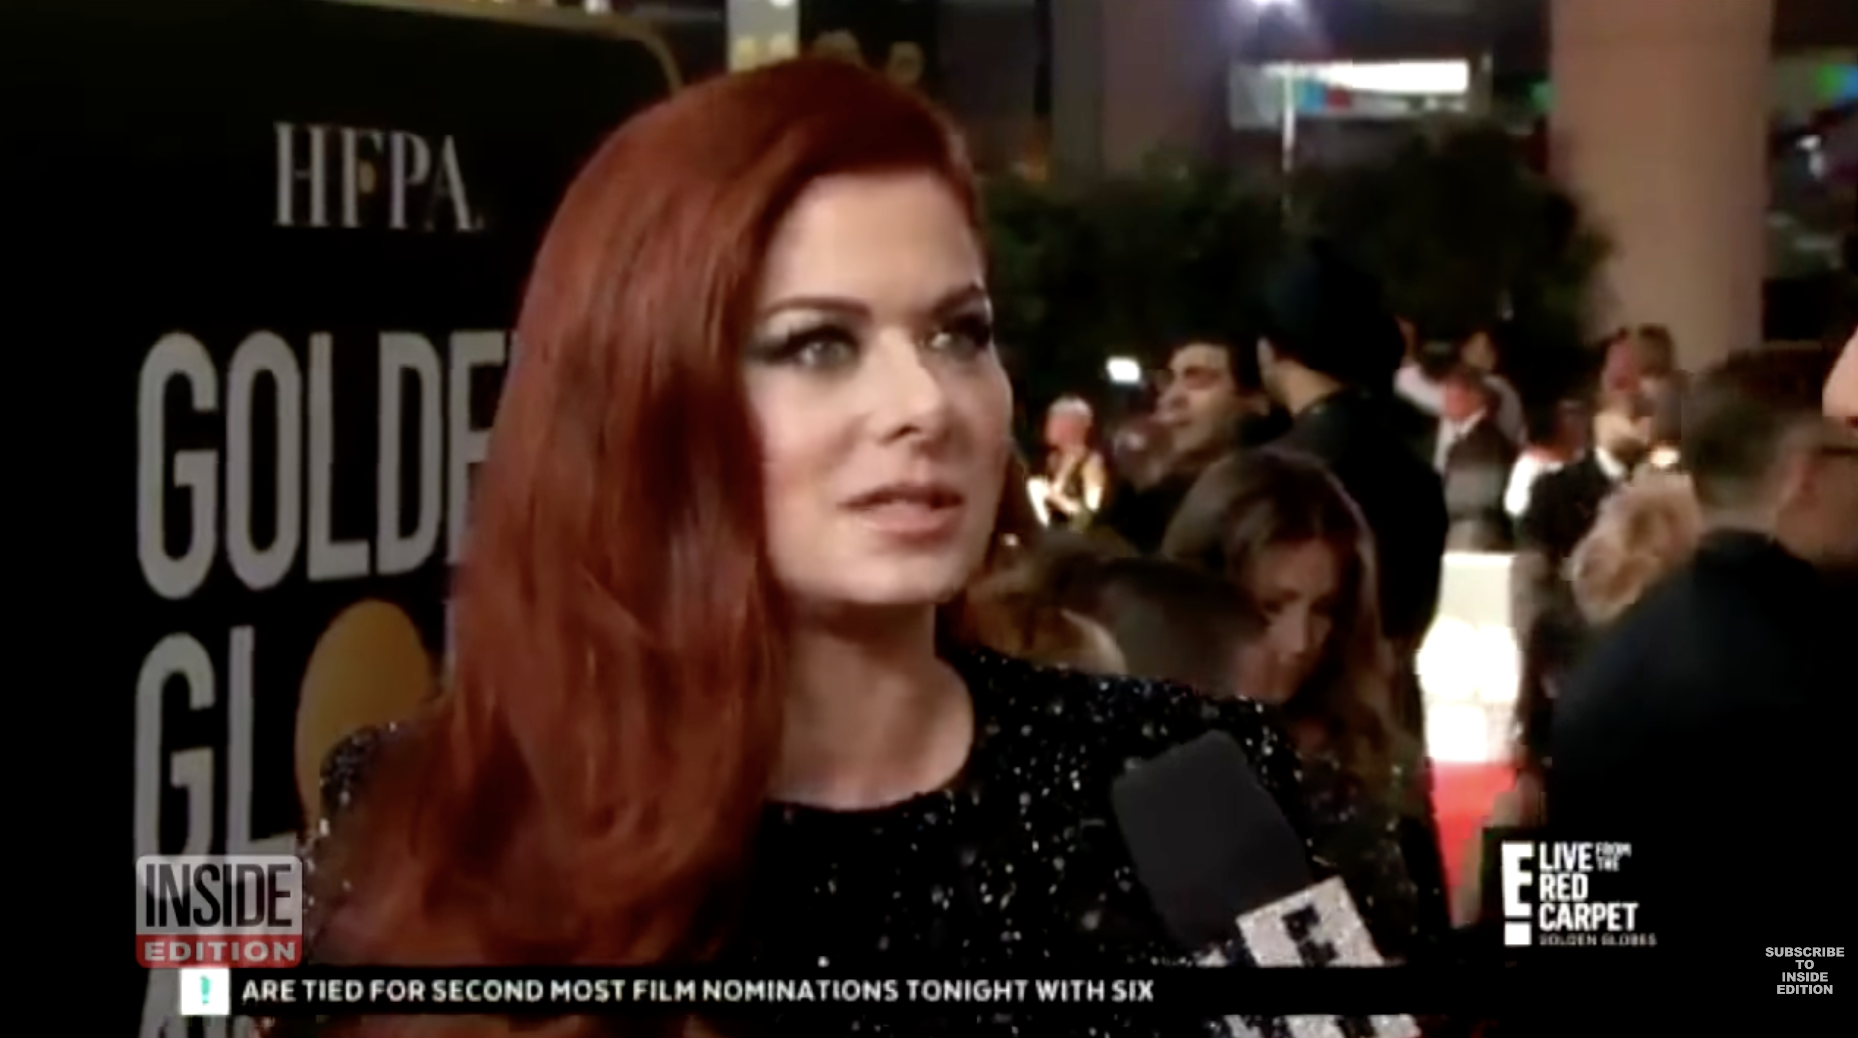 Debra Messing in a sparkly black dress with the Golden Globes red carpet behind her, being interviewed by E!